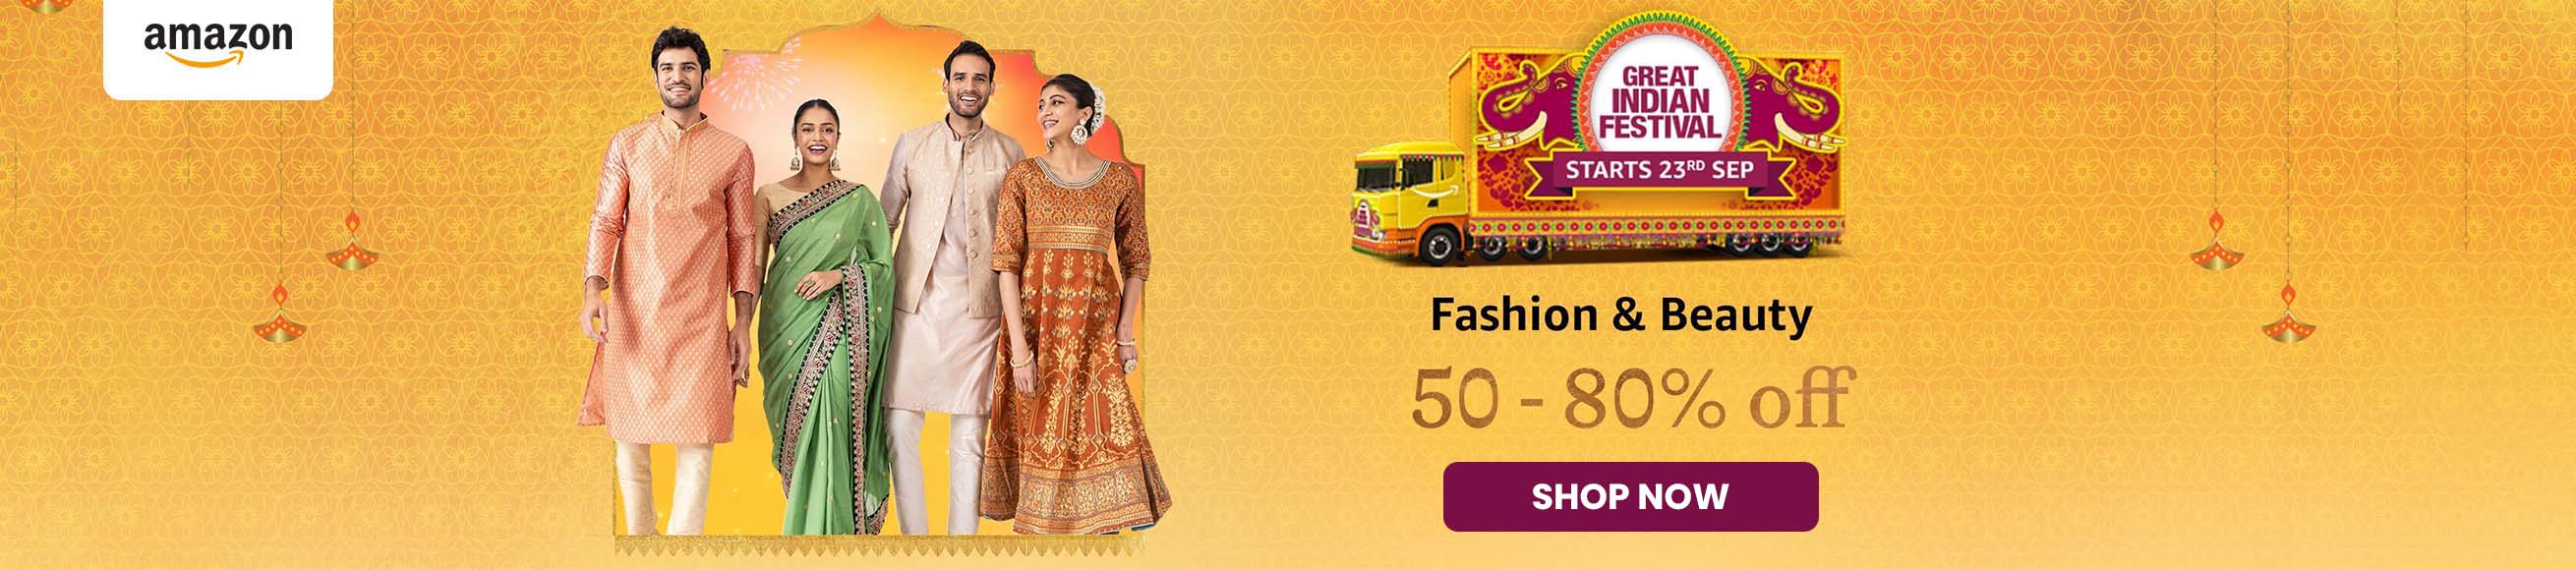 Amazon GREAT INDIAN FESTIVAL Offers on Women's Clothing - (Starts 23rd Sept)